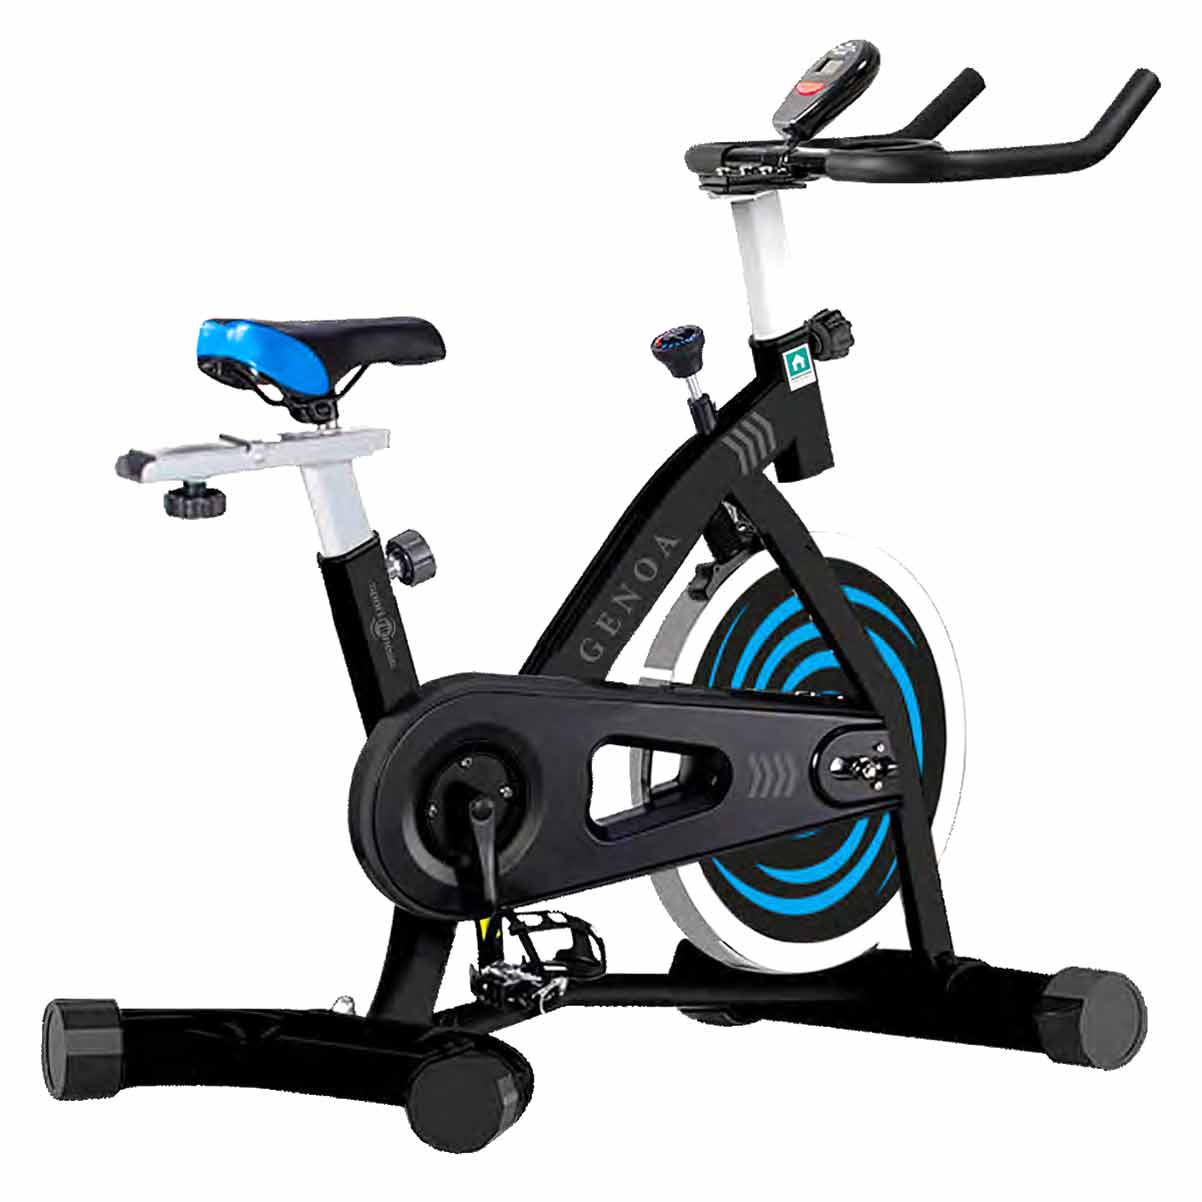 Bicicleta Spinning Magnética Genoa 2.0 Sport Fitness - Athletic